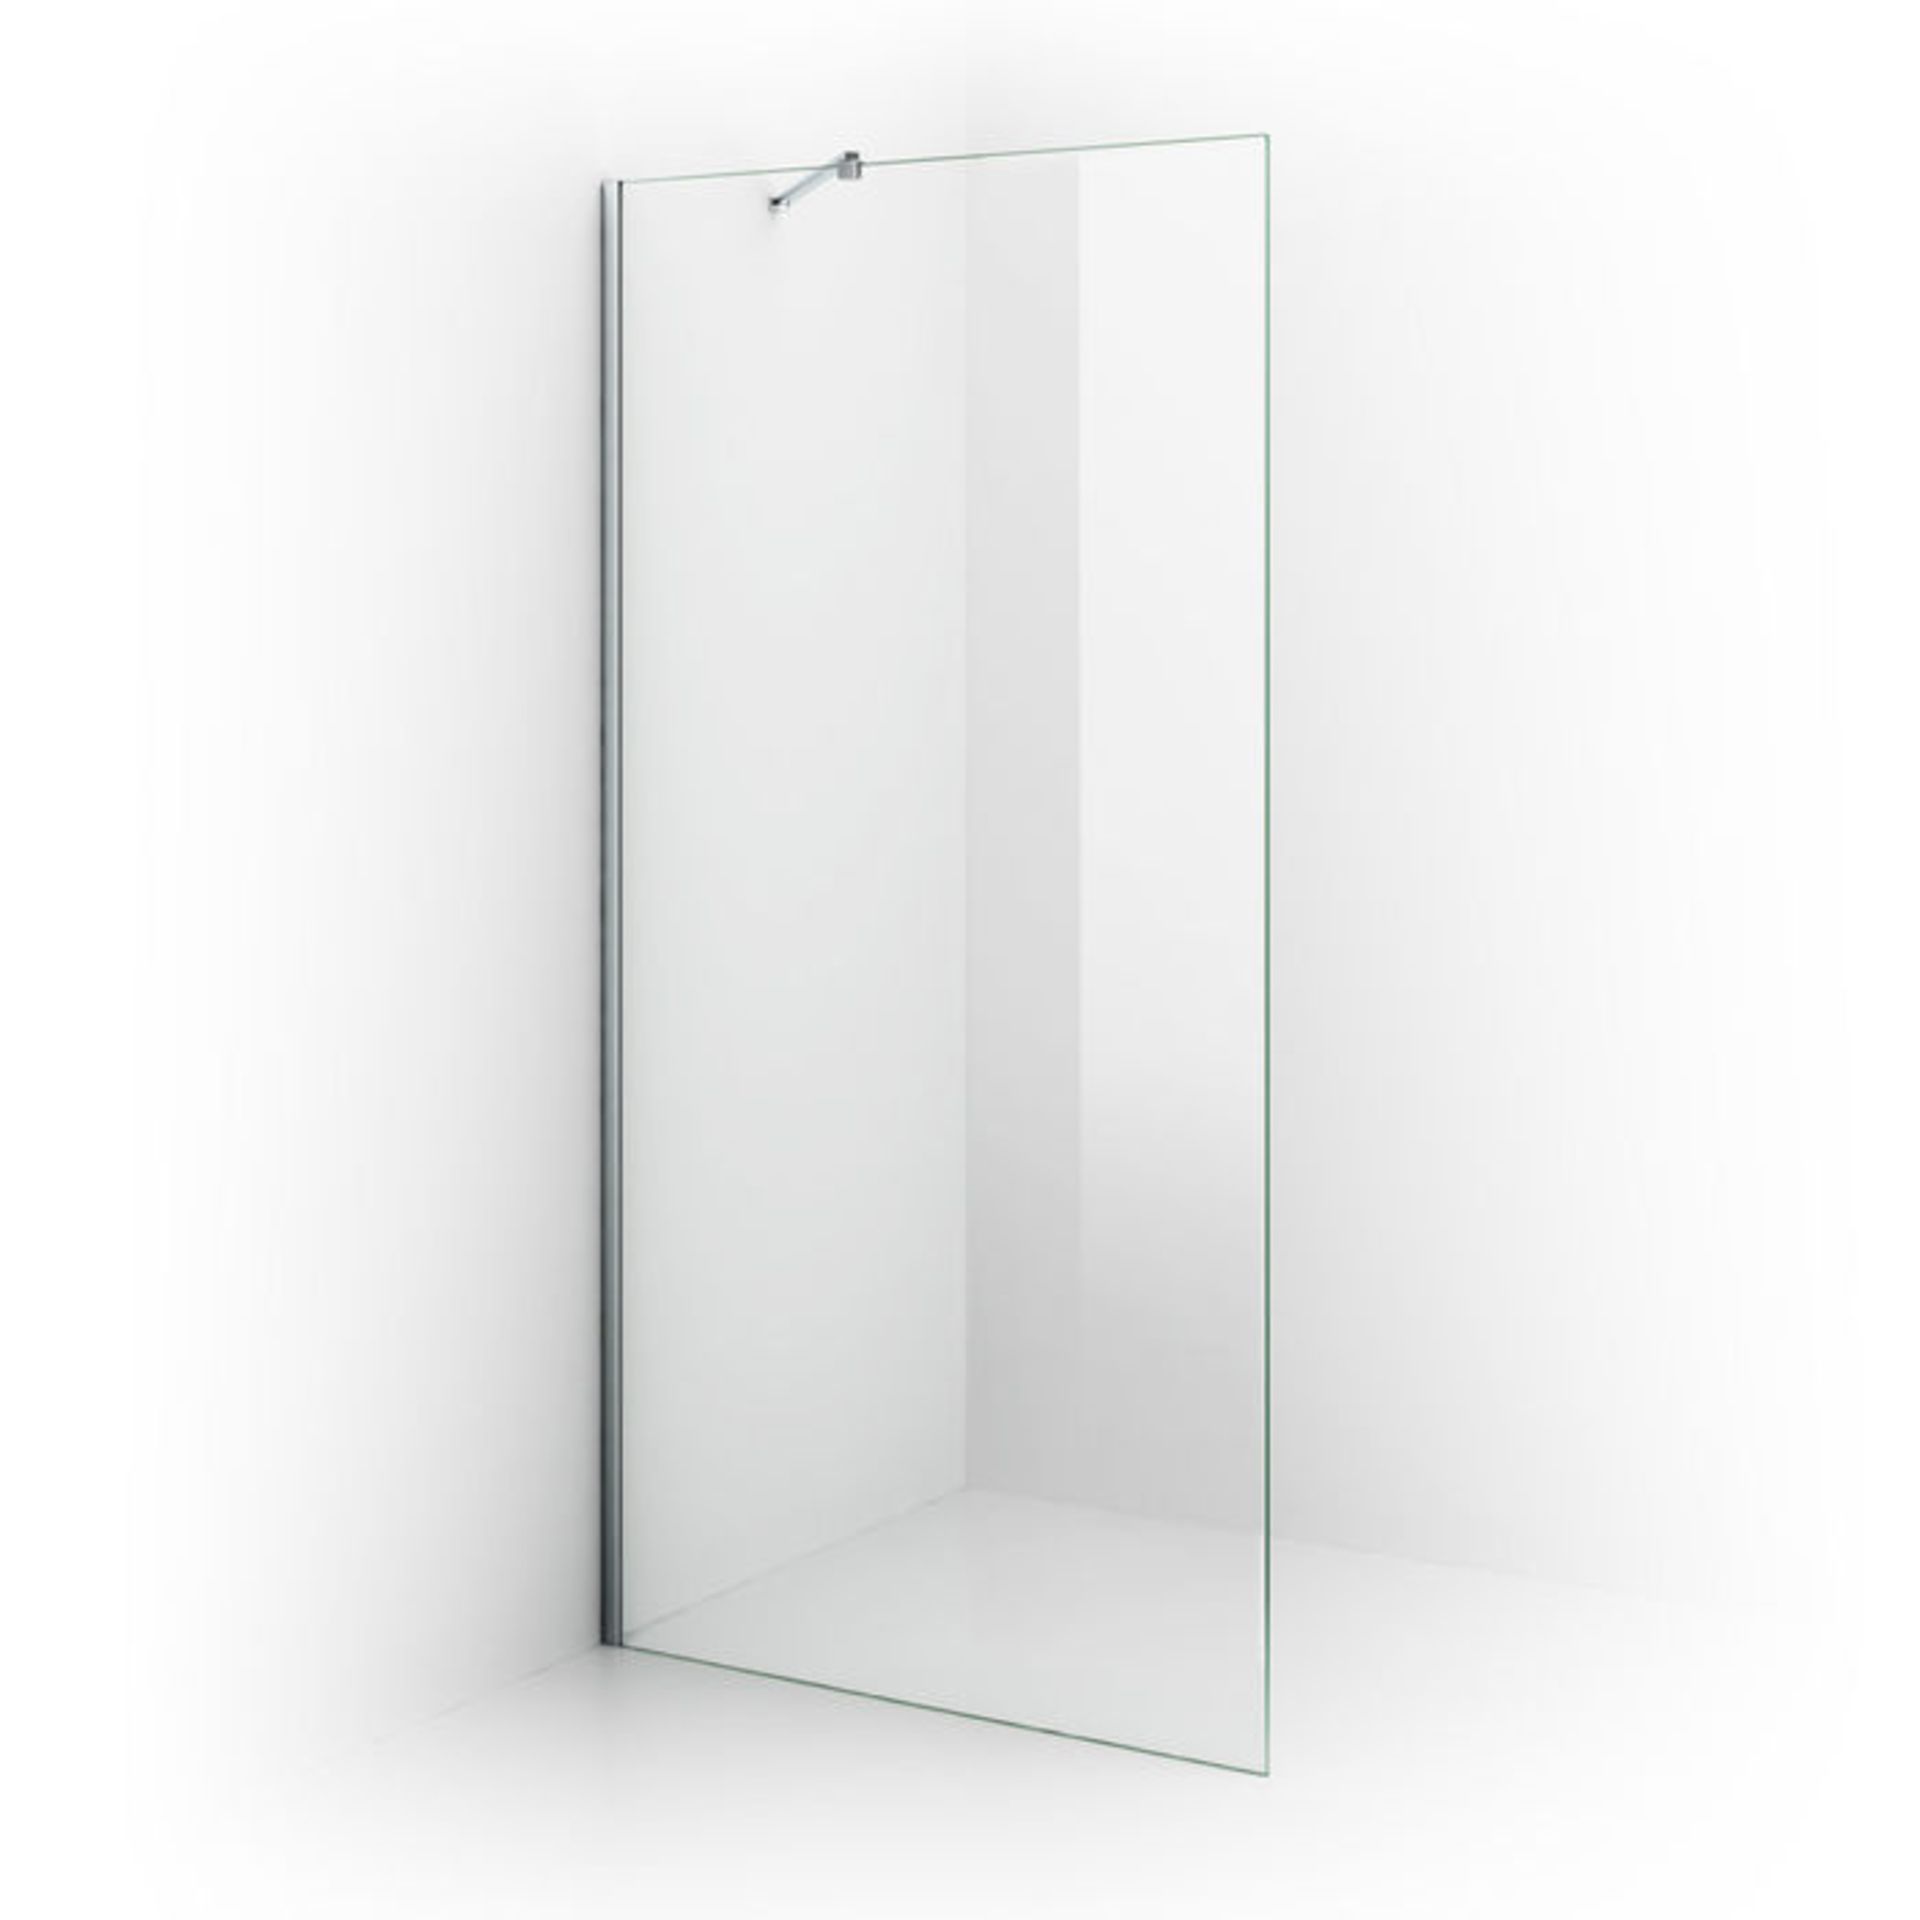 (W72) 800mm - 8mm - Premium EasyClean Wetroom Panel. RRP £249.99. 8mm EasyClean glass - Our glass - Image 4 of 4